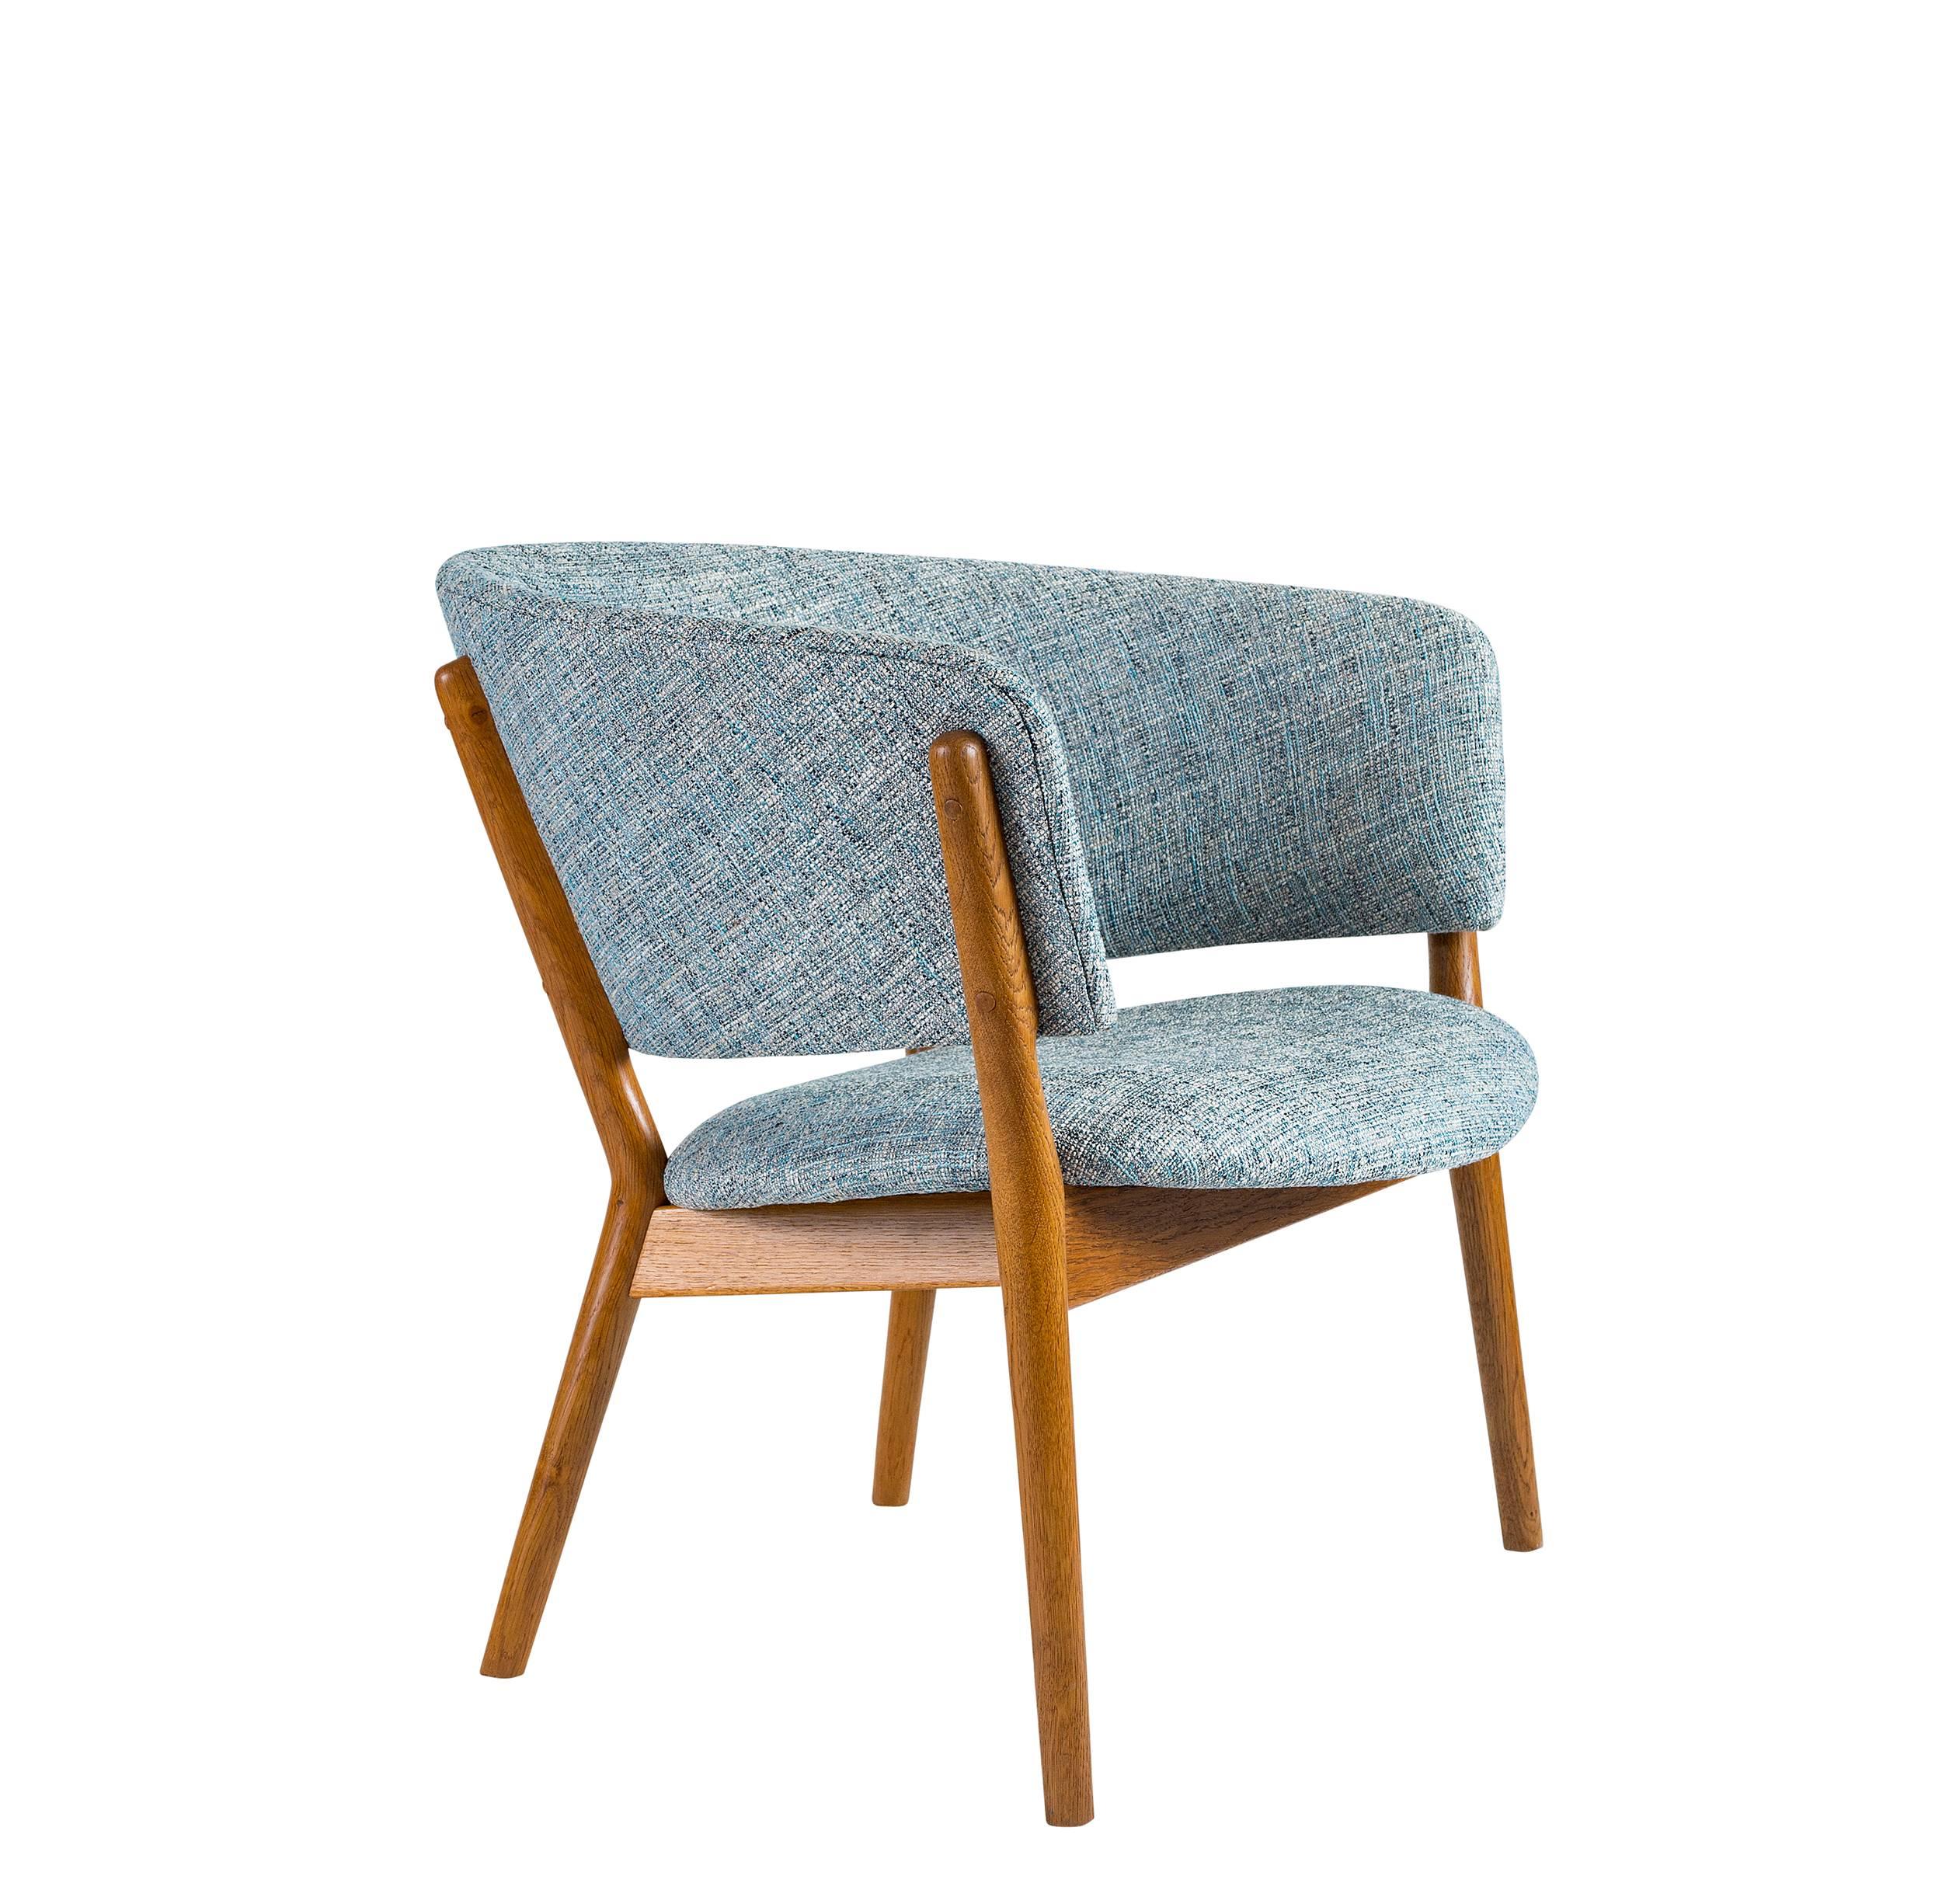 Nanna Ditzel lounge chair designed in 1952 and produced by Knud Willadsen.